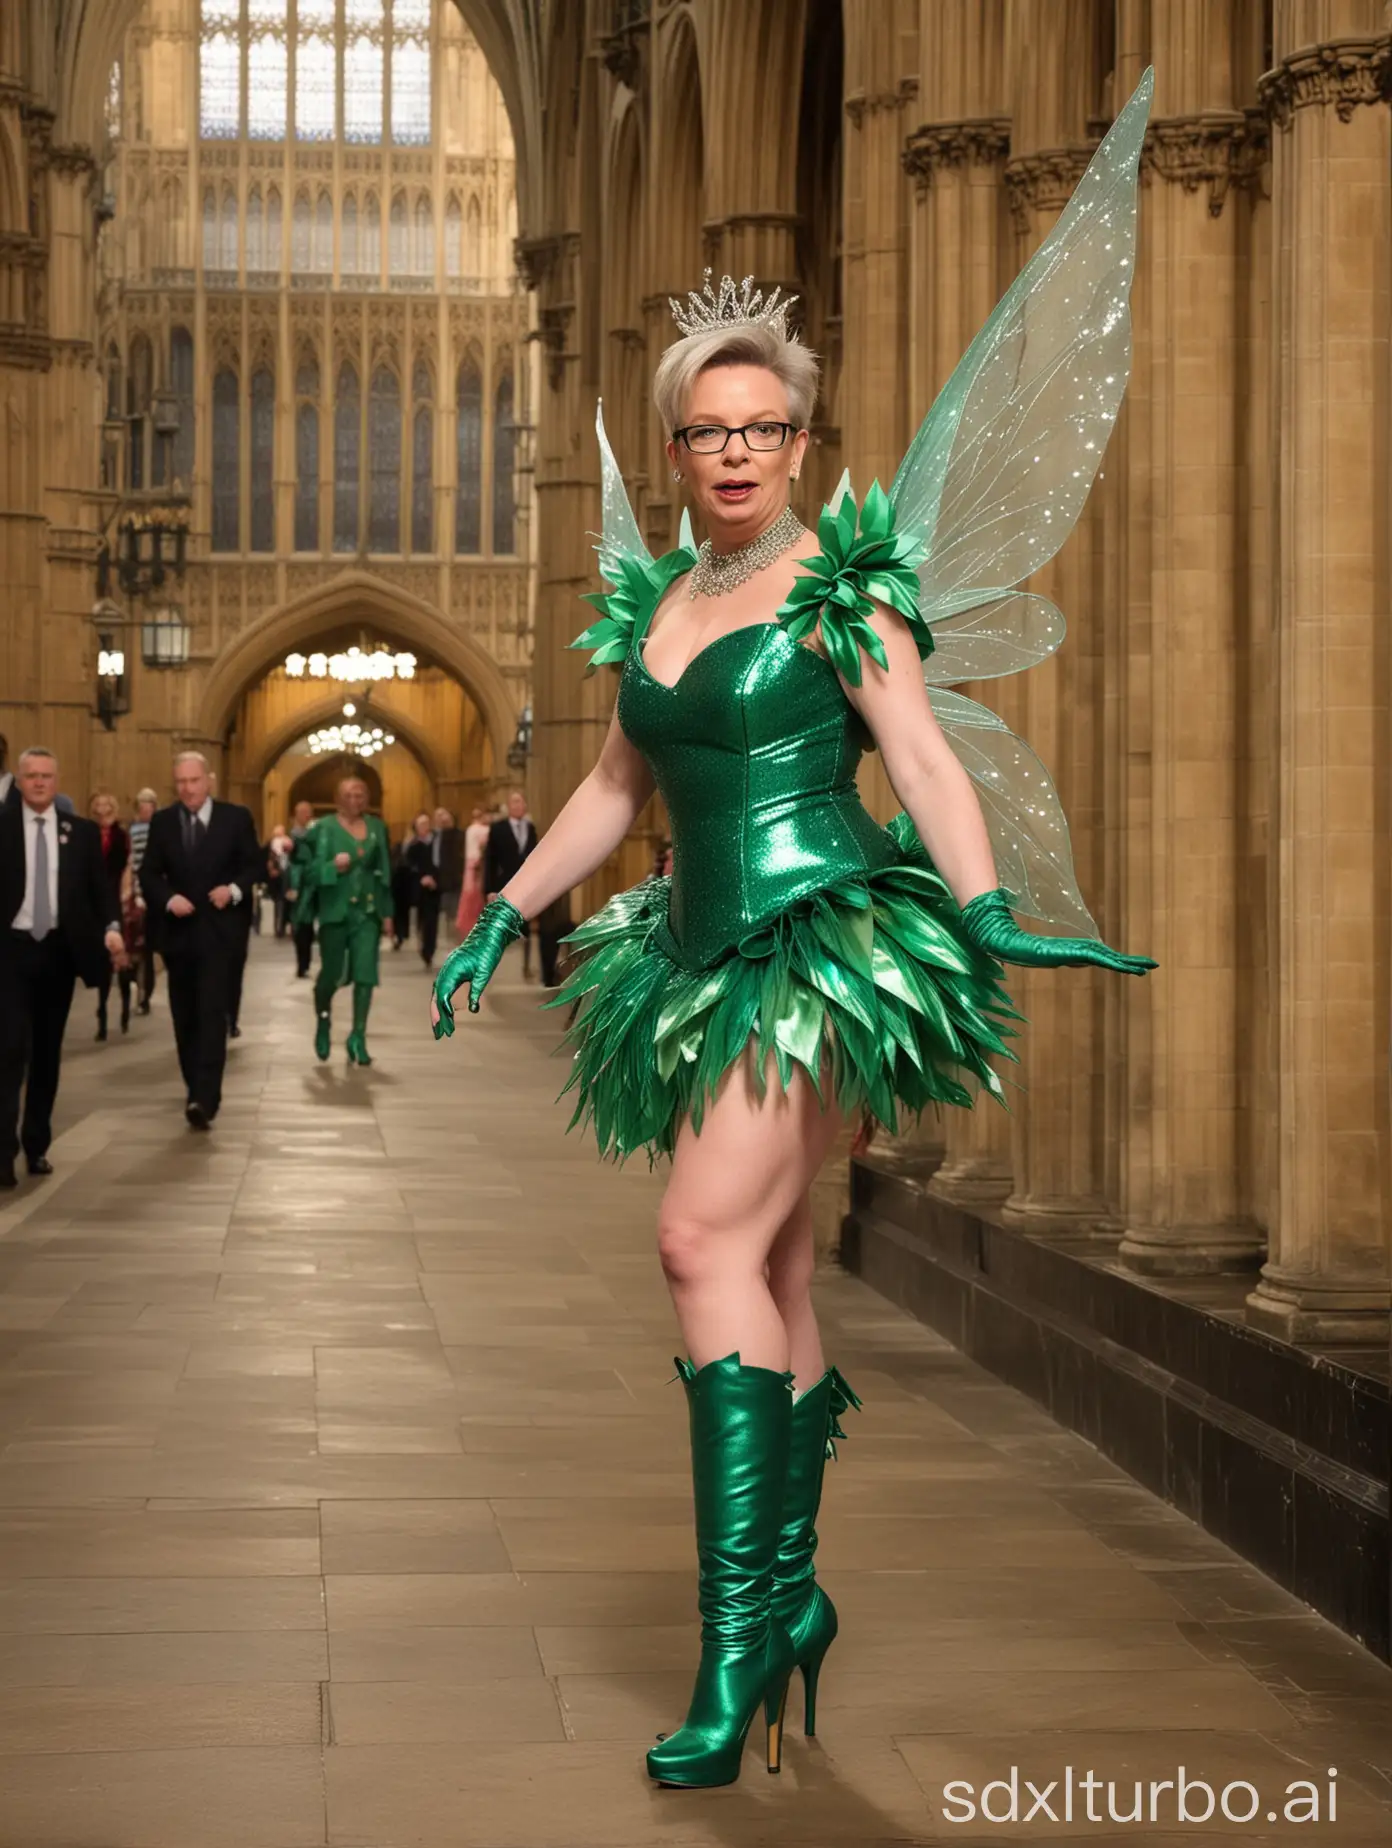 British-Politician-Michael-Gove-Struts-in-Emerald-Tinkerbell-Fairy-Drag-at-Houses-of-Parliament